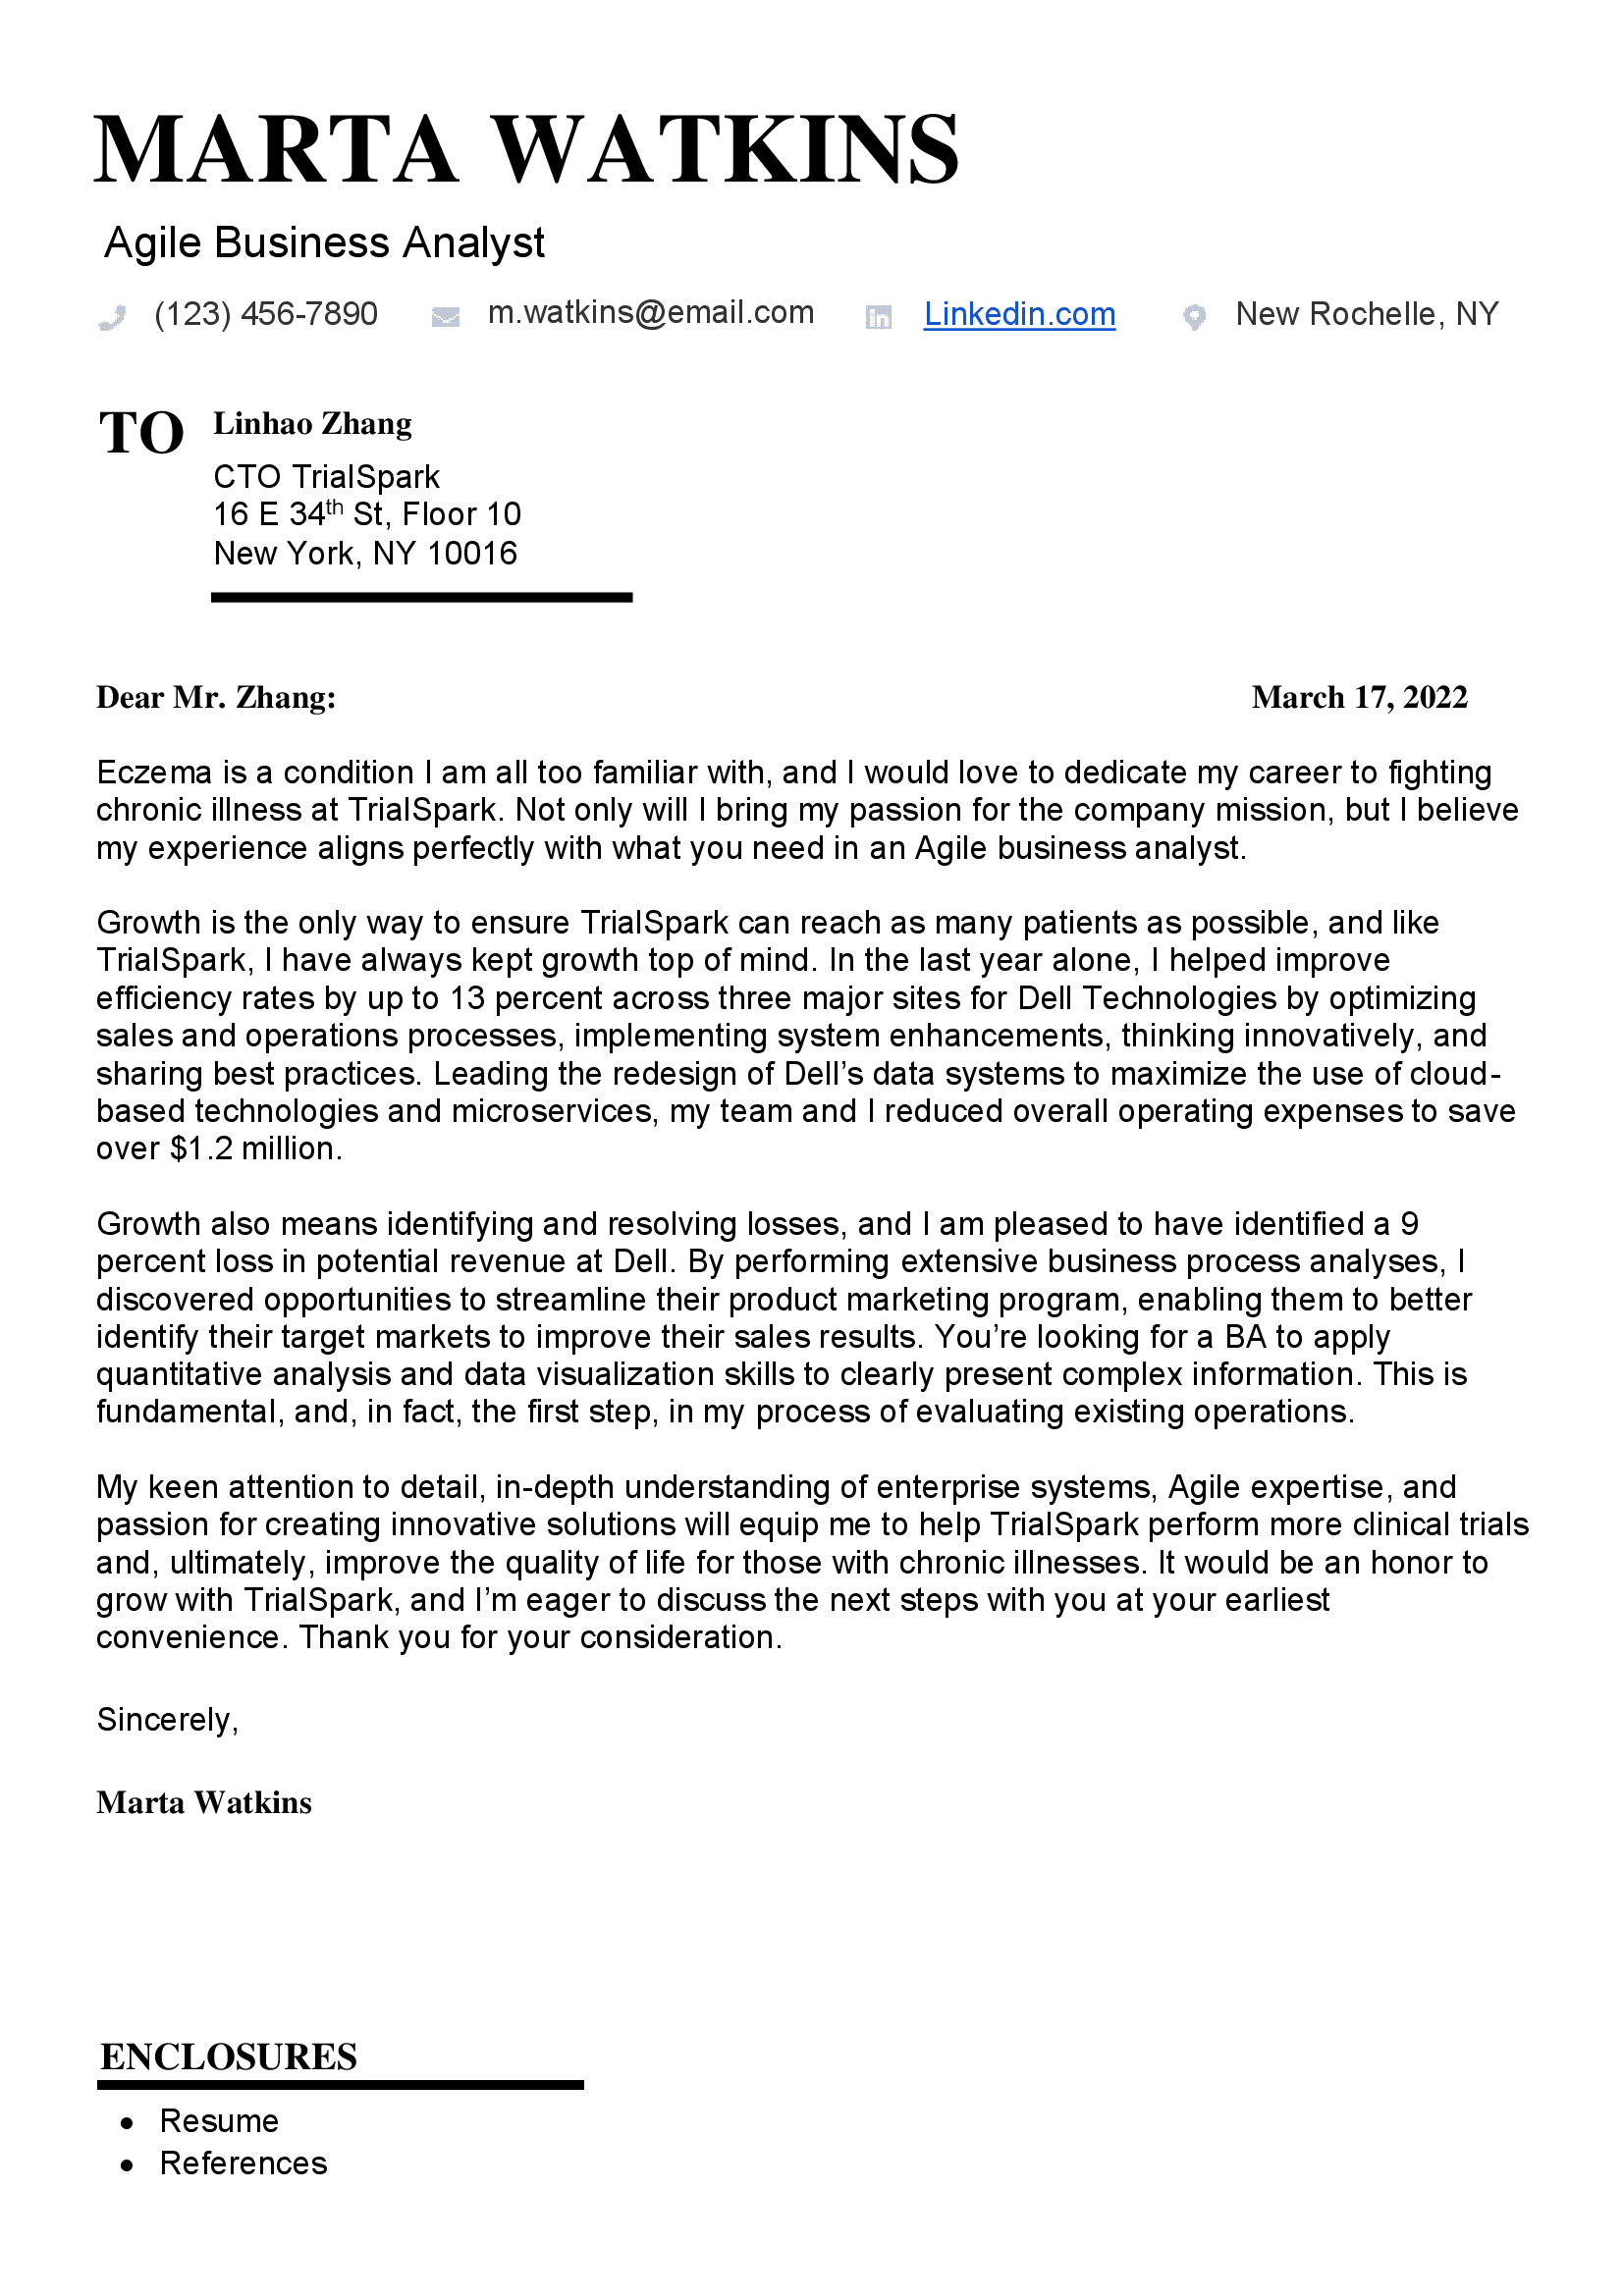 Agile business analyst cover letter 